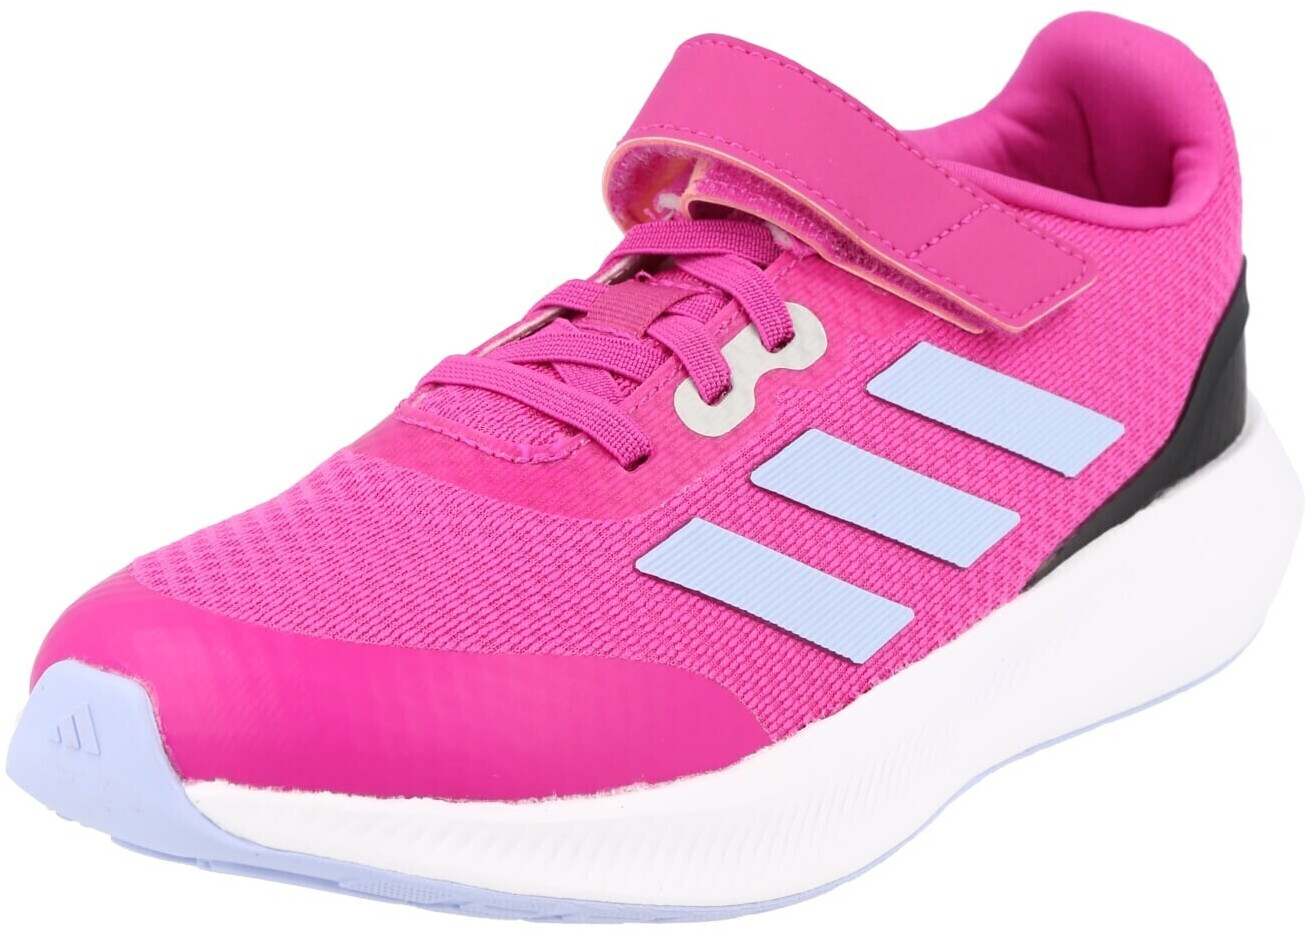 Black from Best Dawn/Core Top Strap Lace Fuchsia/Blue Buy Deals Adidas – on Elastic 3.0 (Today) Kids £15.50 Lucid Runfalcon